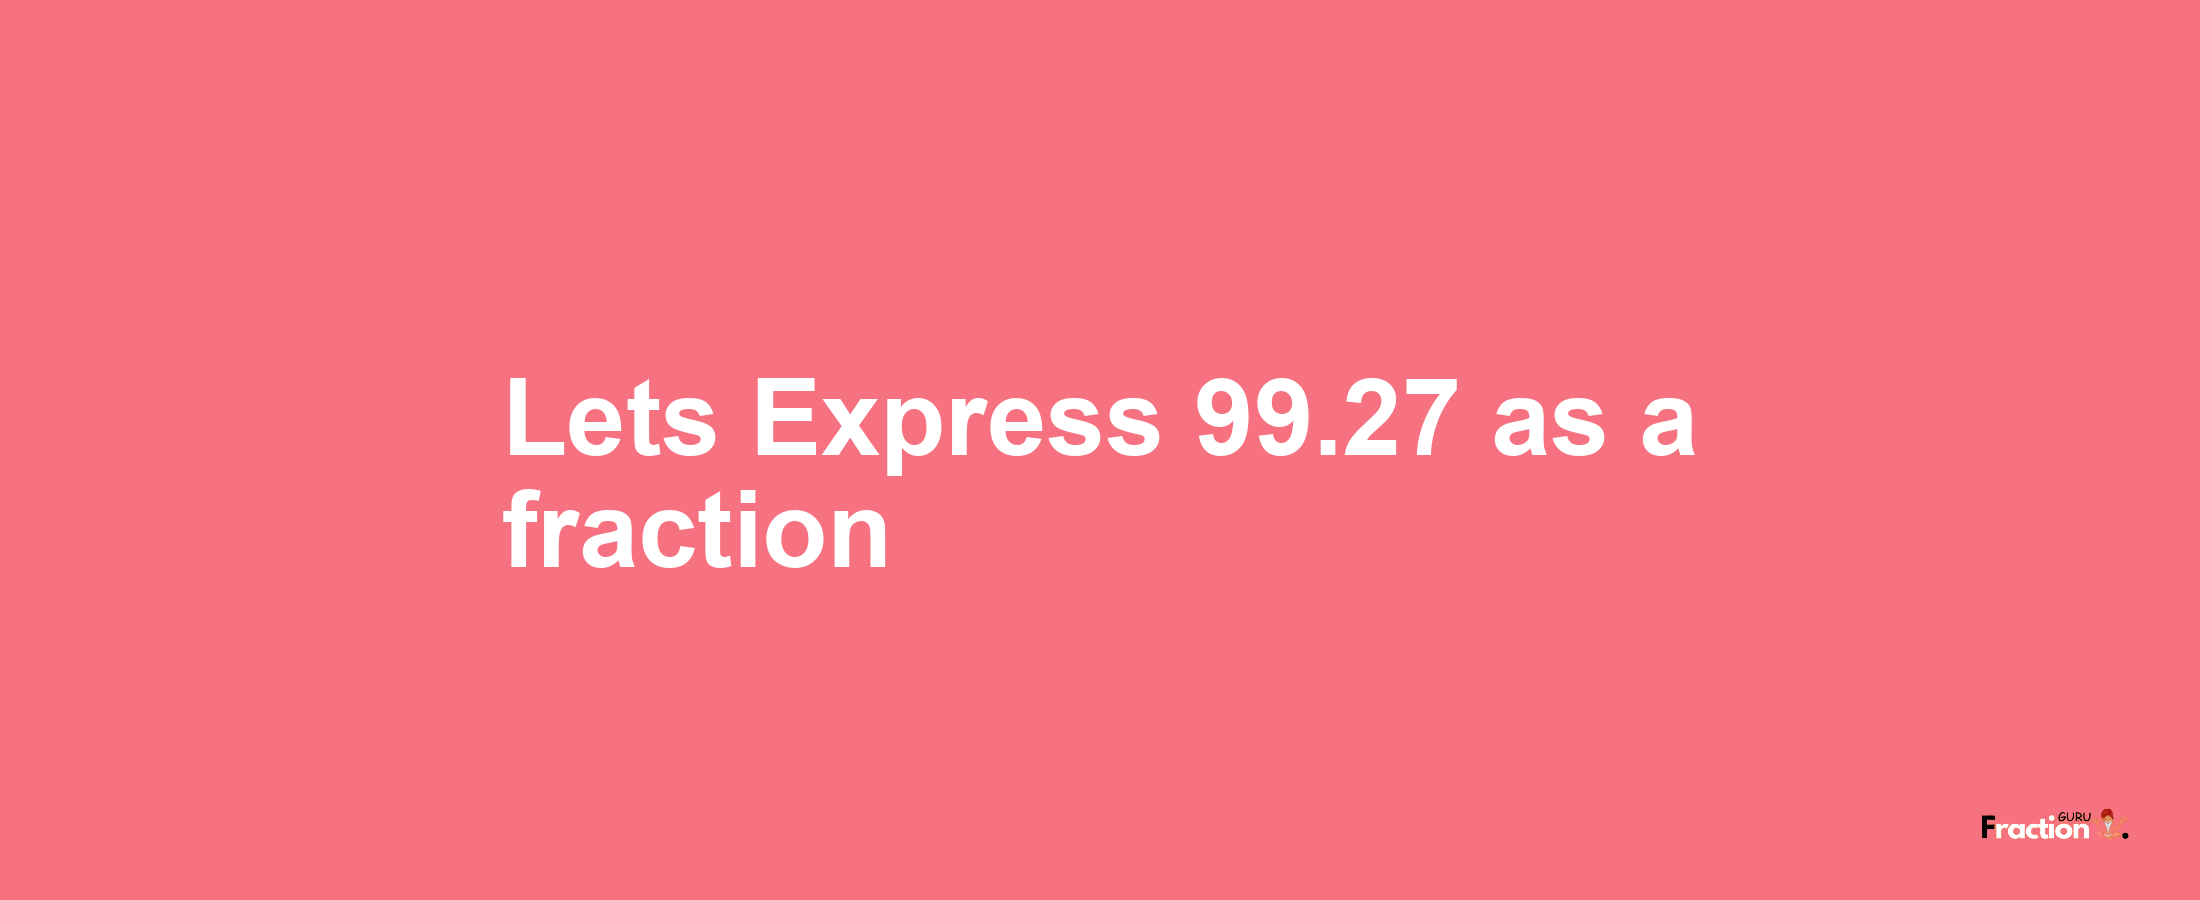 Lets Express 99.27 as afraction